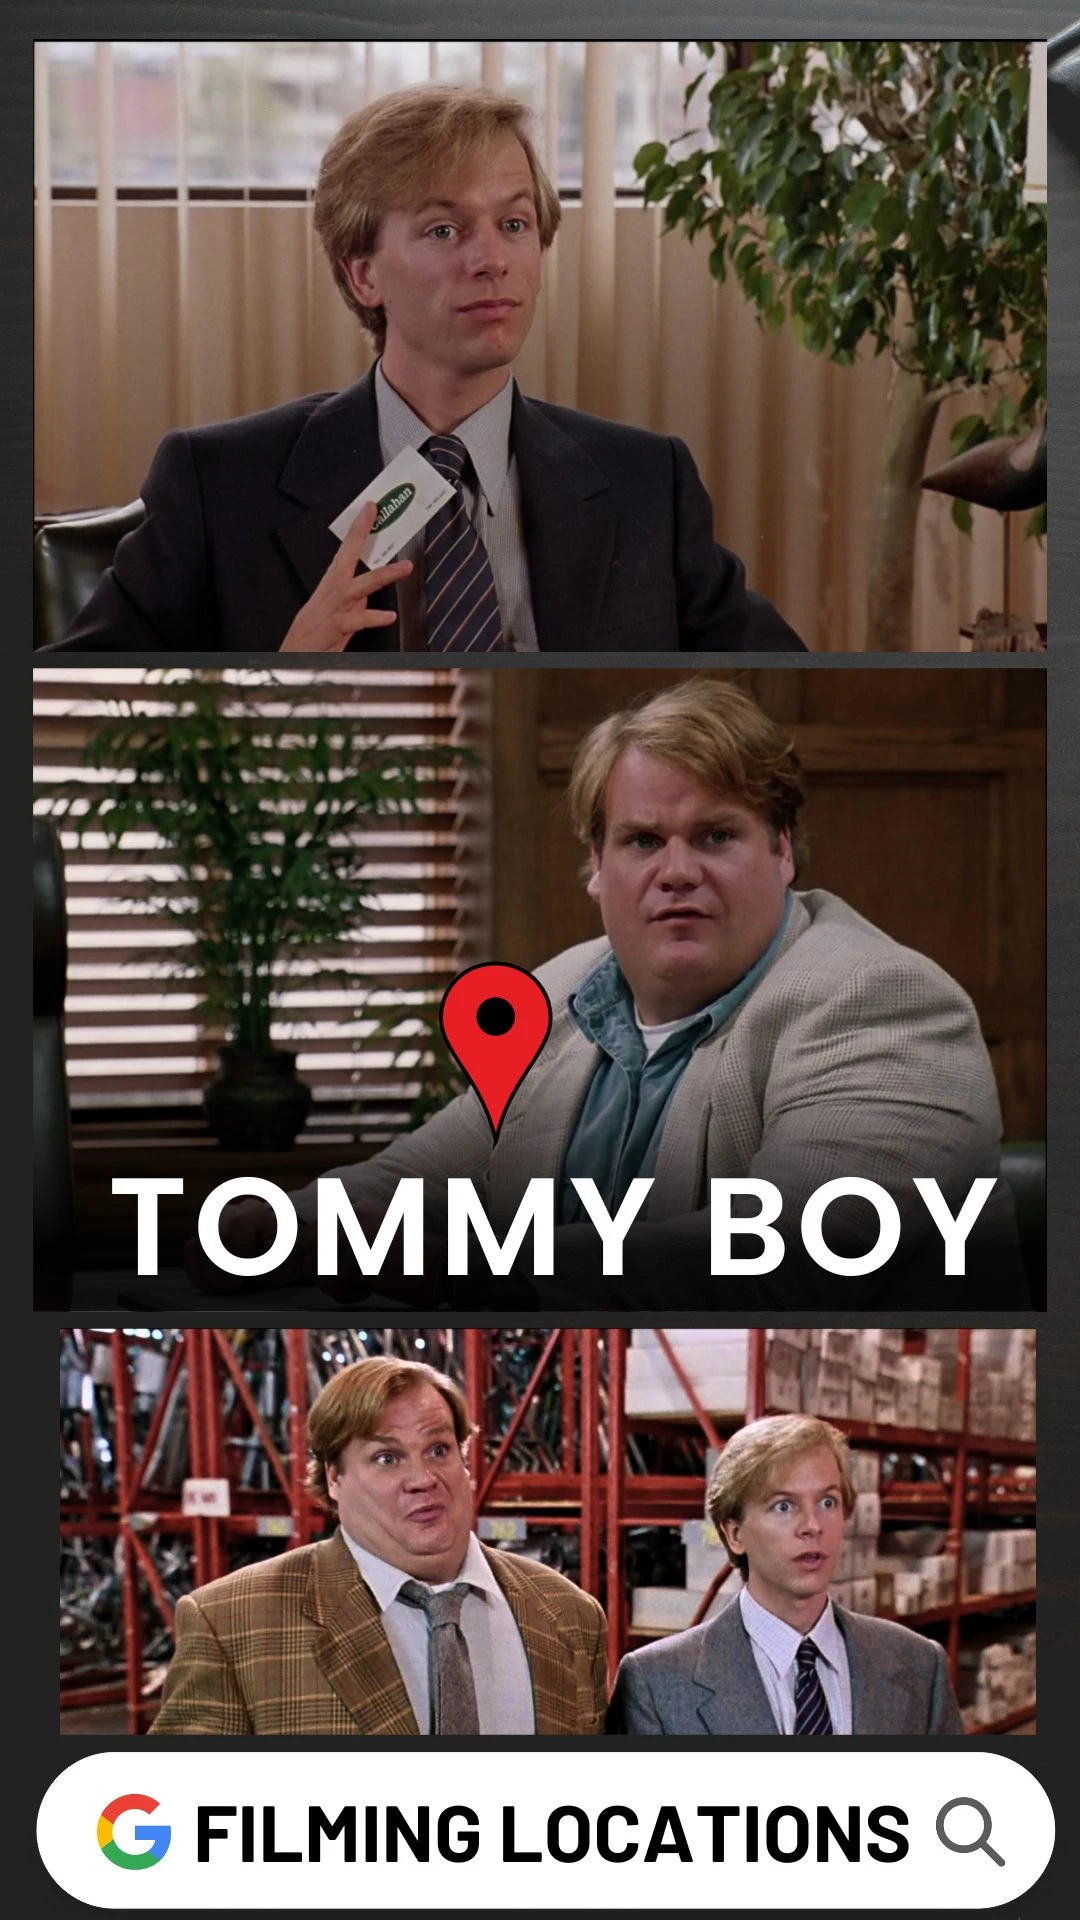 Tommy Boy Filming Locations